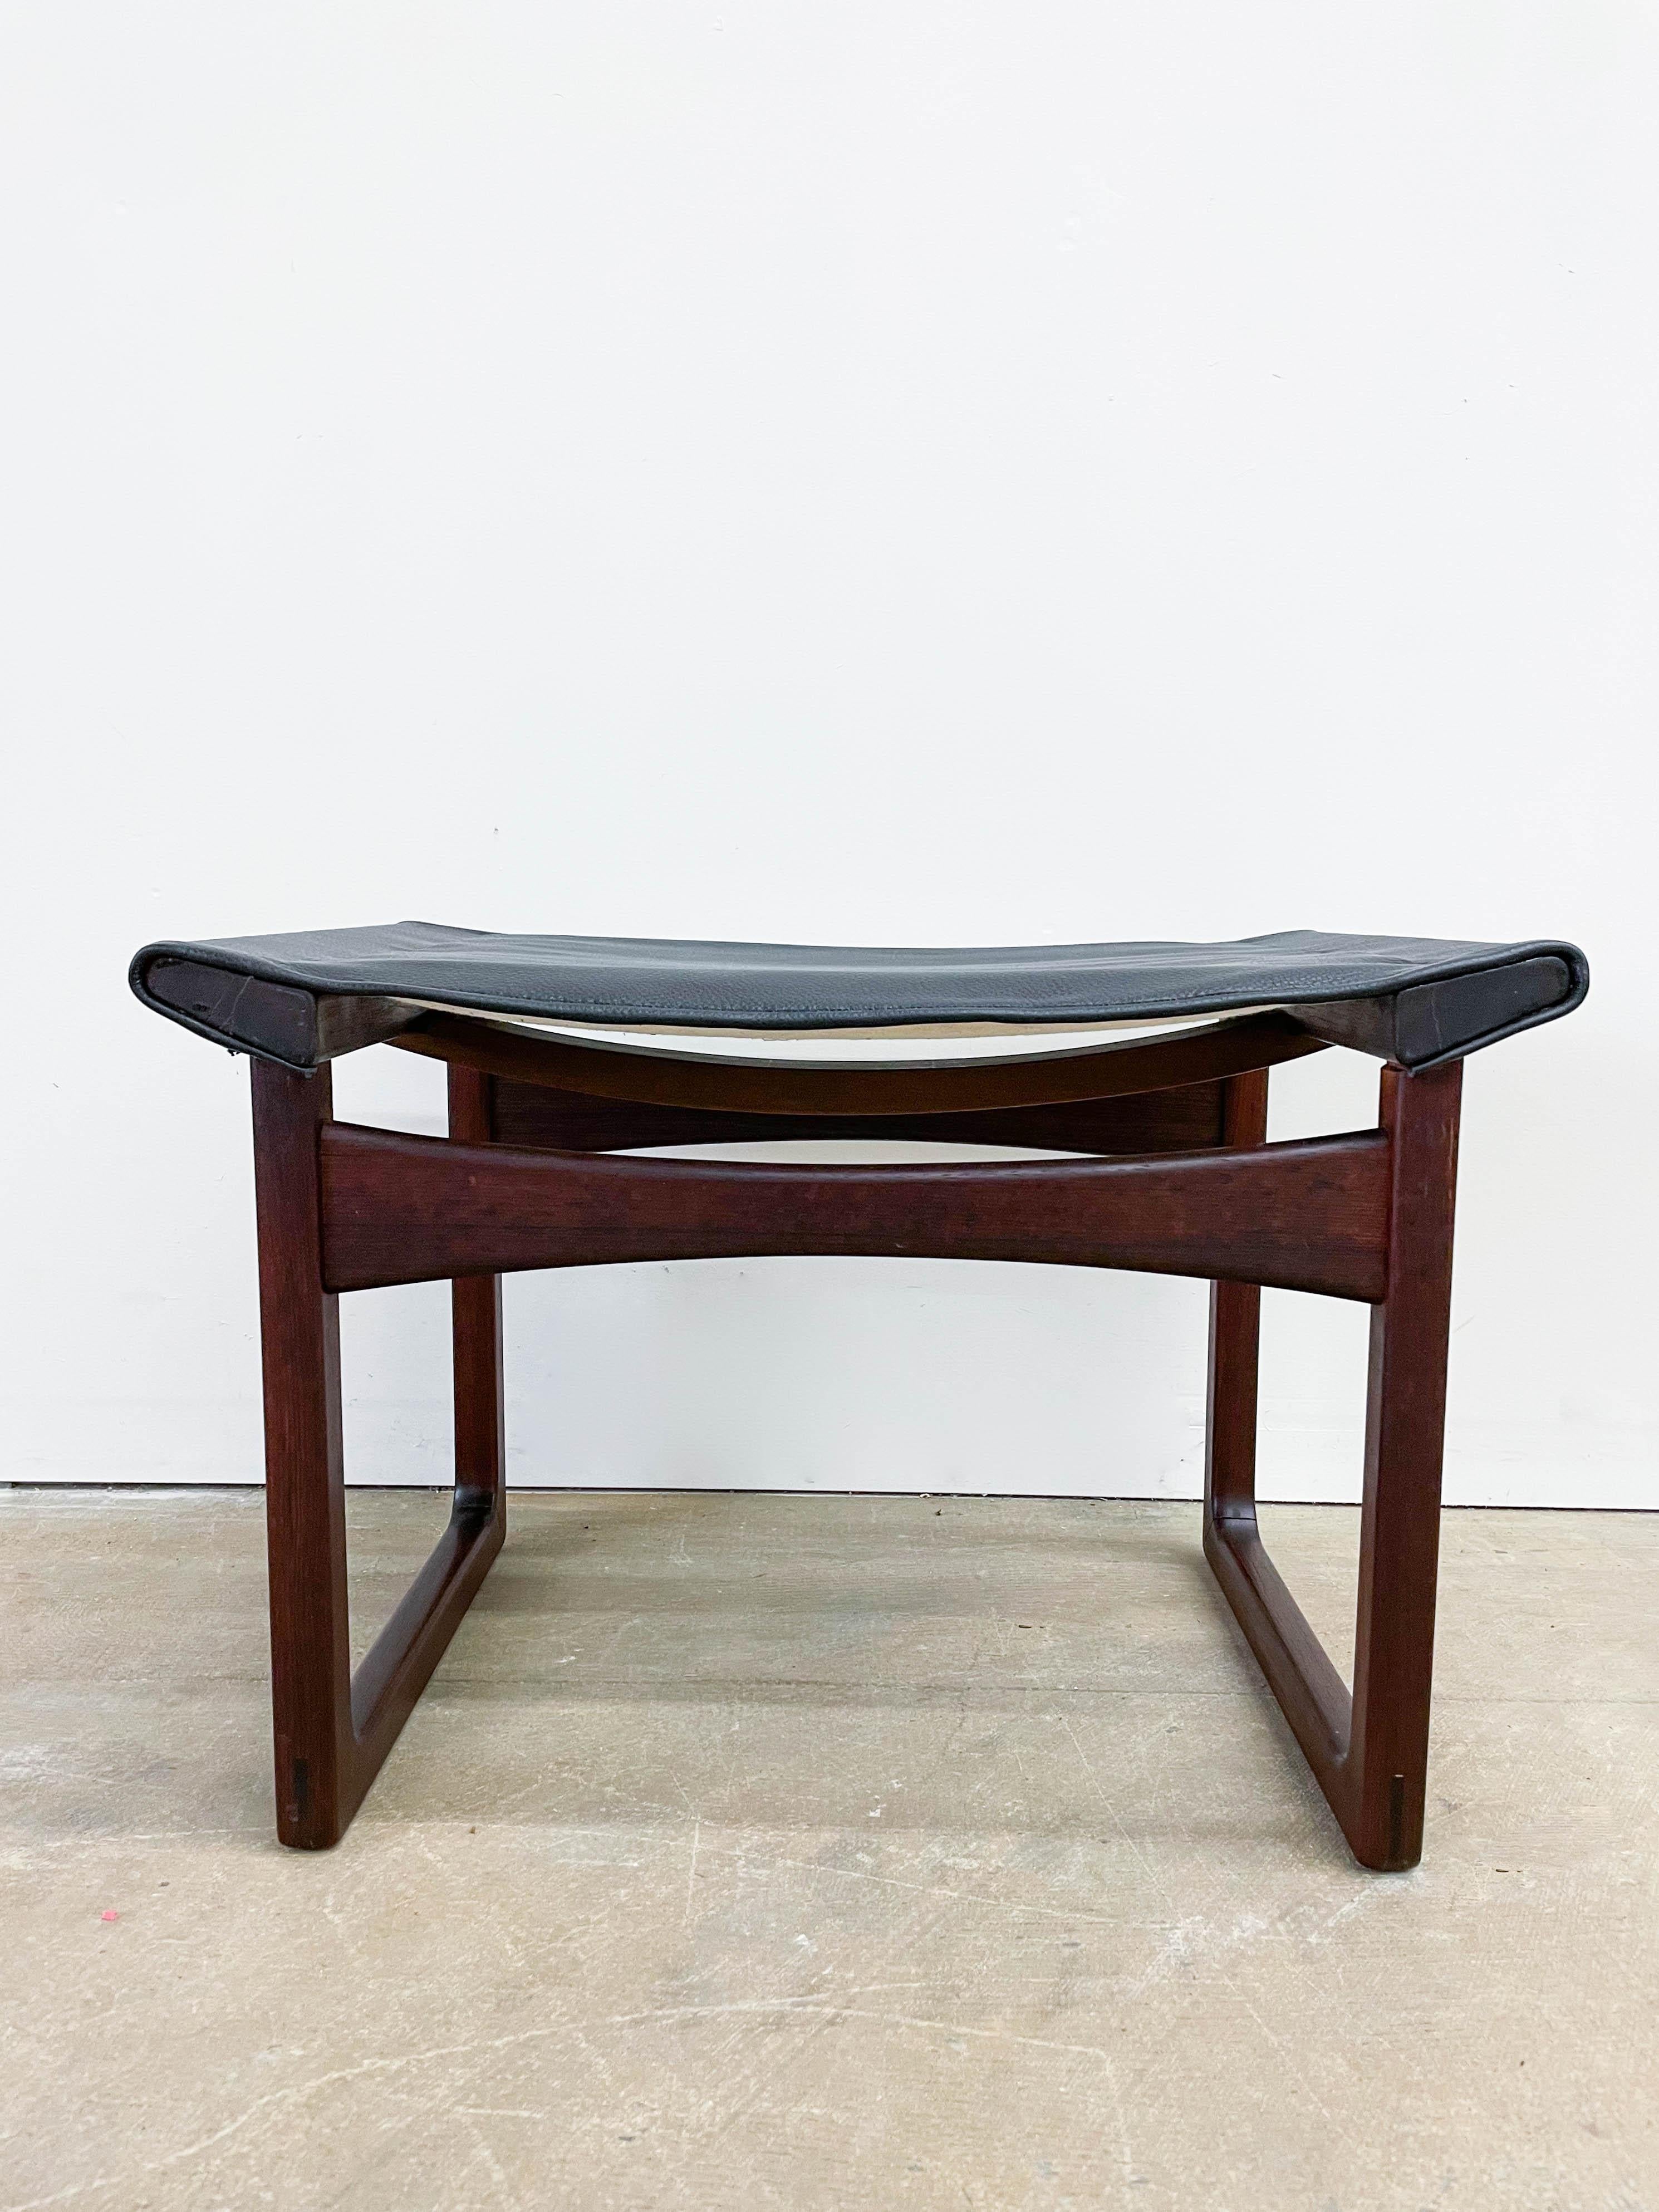 This is a beautiful Danish modern footstool designed by Aksel Bender Madsen and Ejner Larsen and made by Ludvig Pontopiddian in the late 1950s. The footstool boasts a solid rosewood frame with nice joinery detail such as through tennons on the